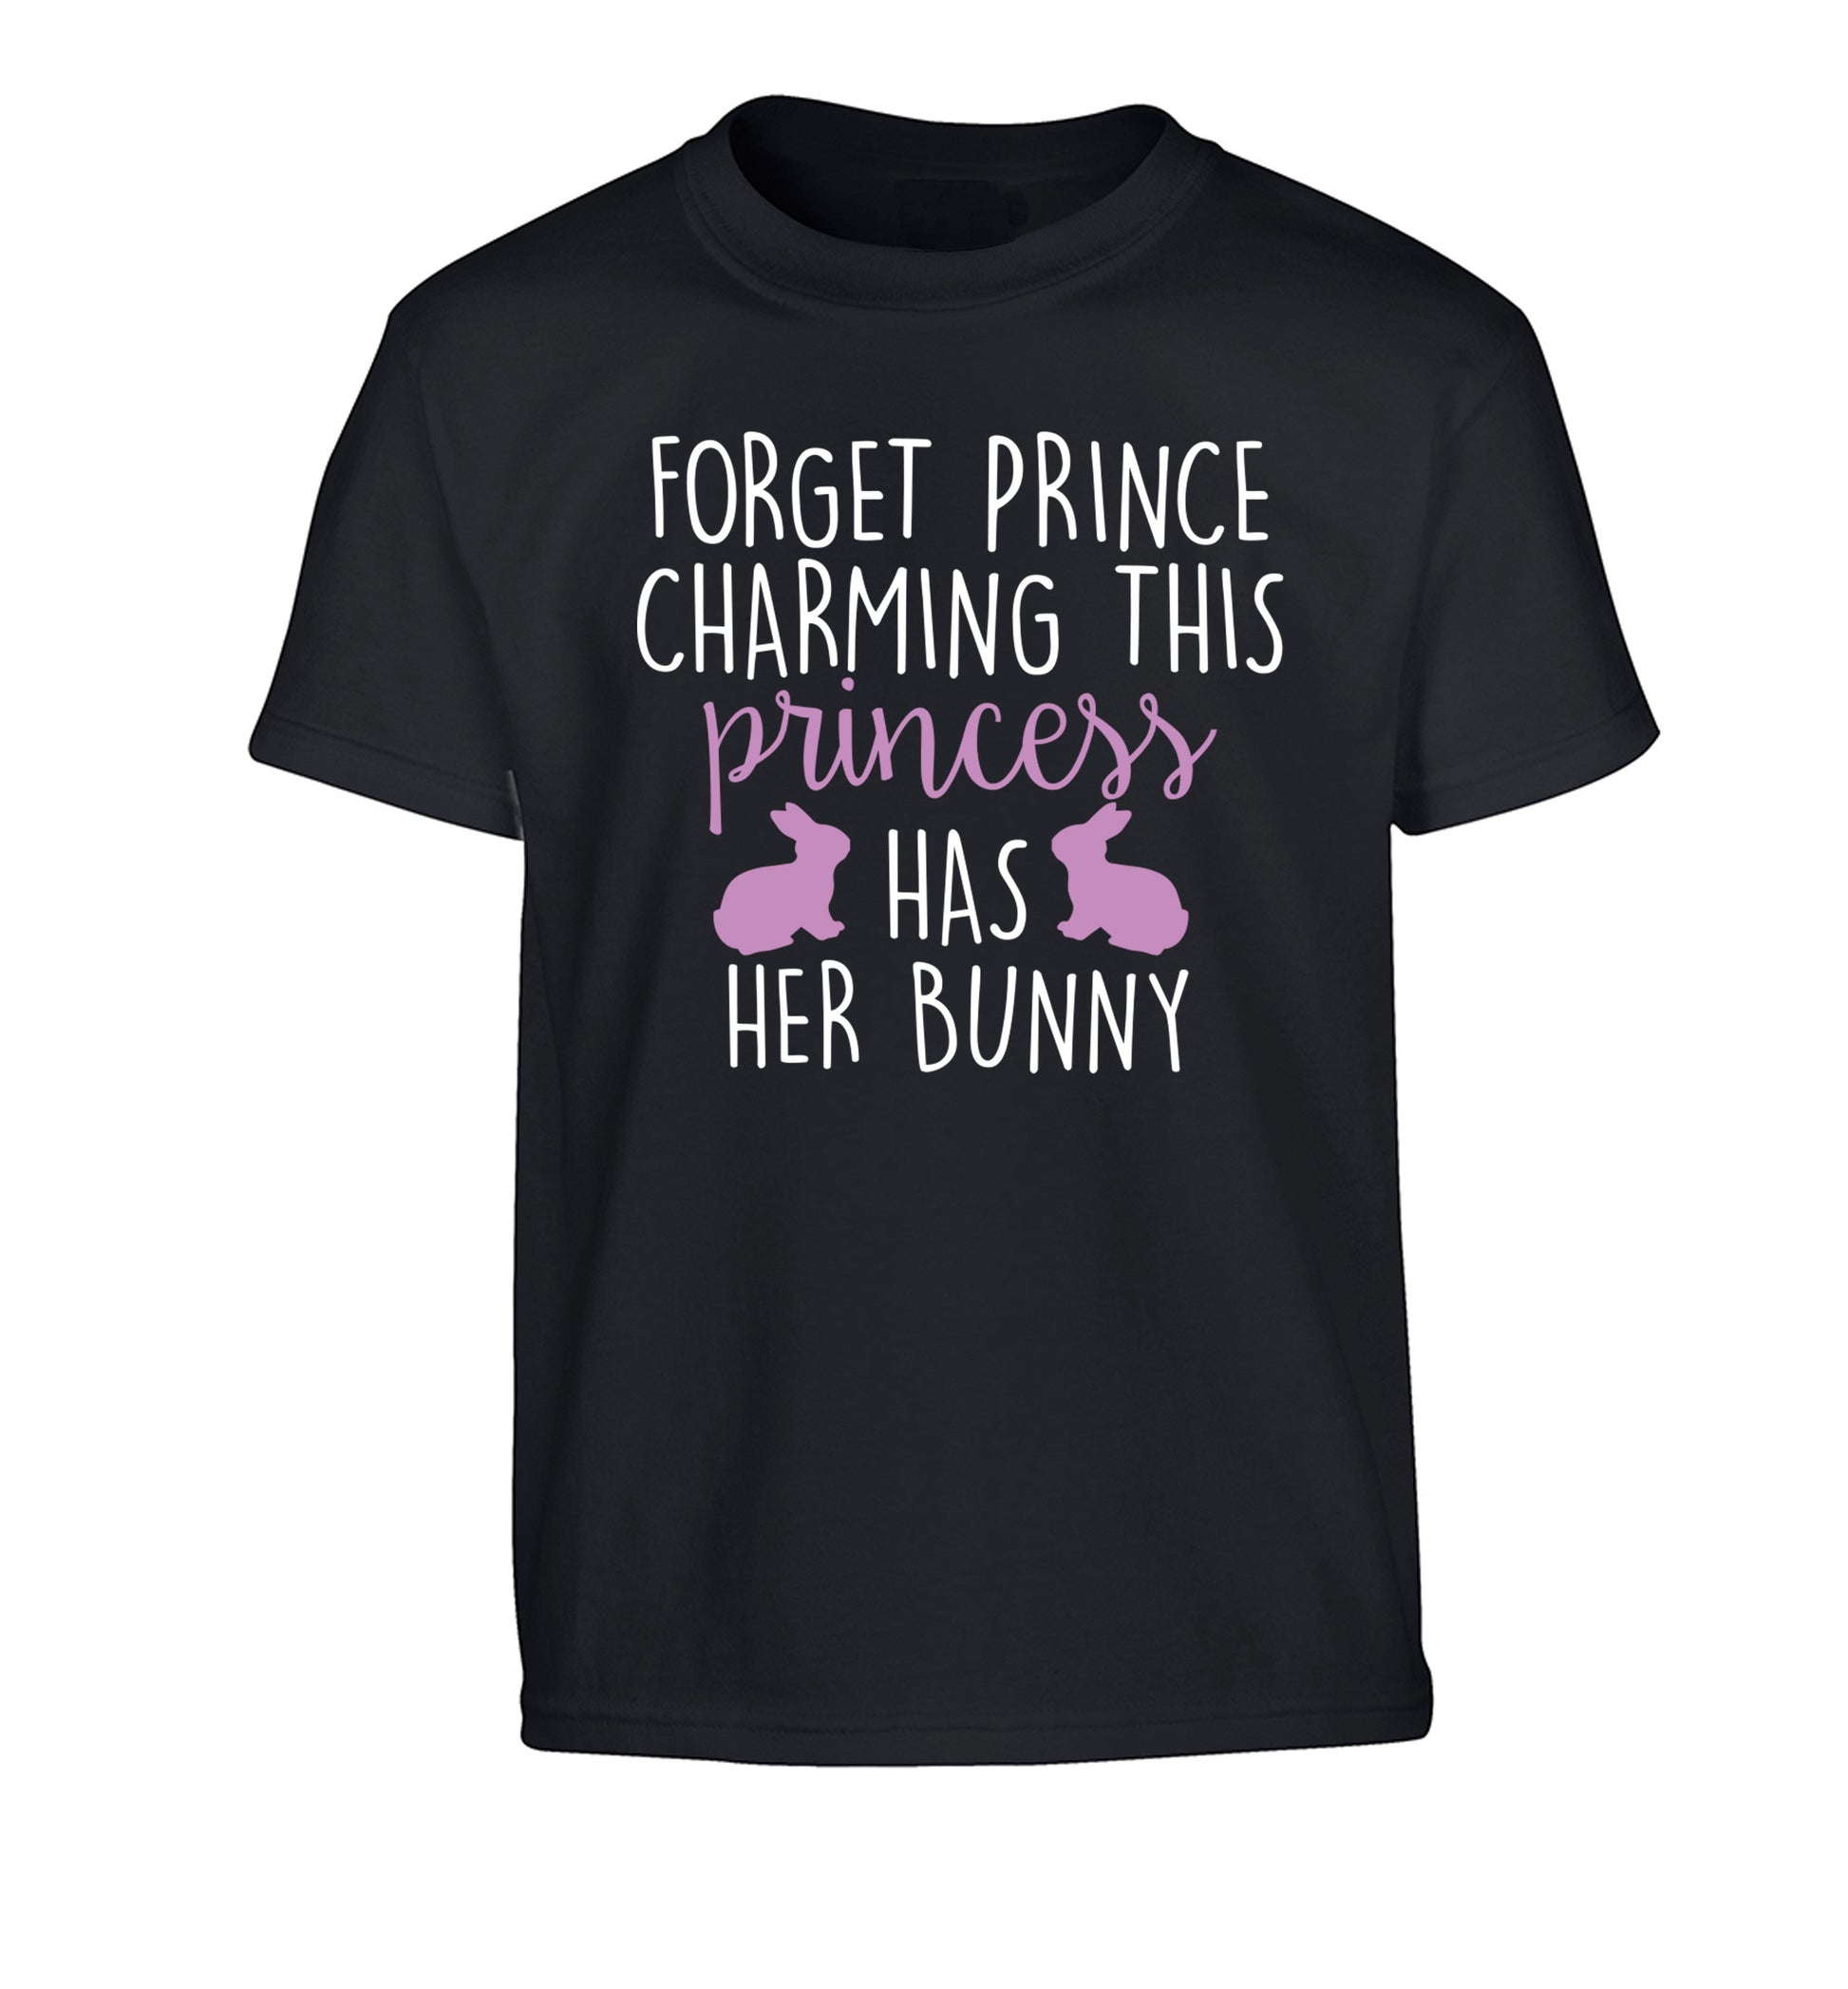 Forget prince charming this princess has her bunny Children's black Tshirt 12-14 Years